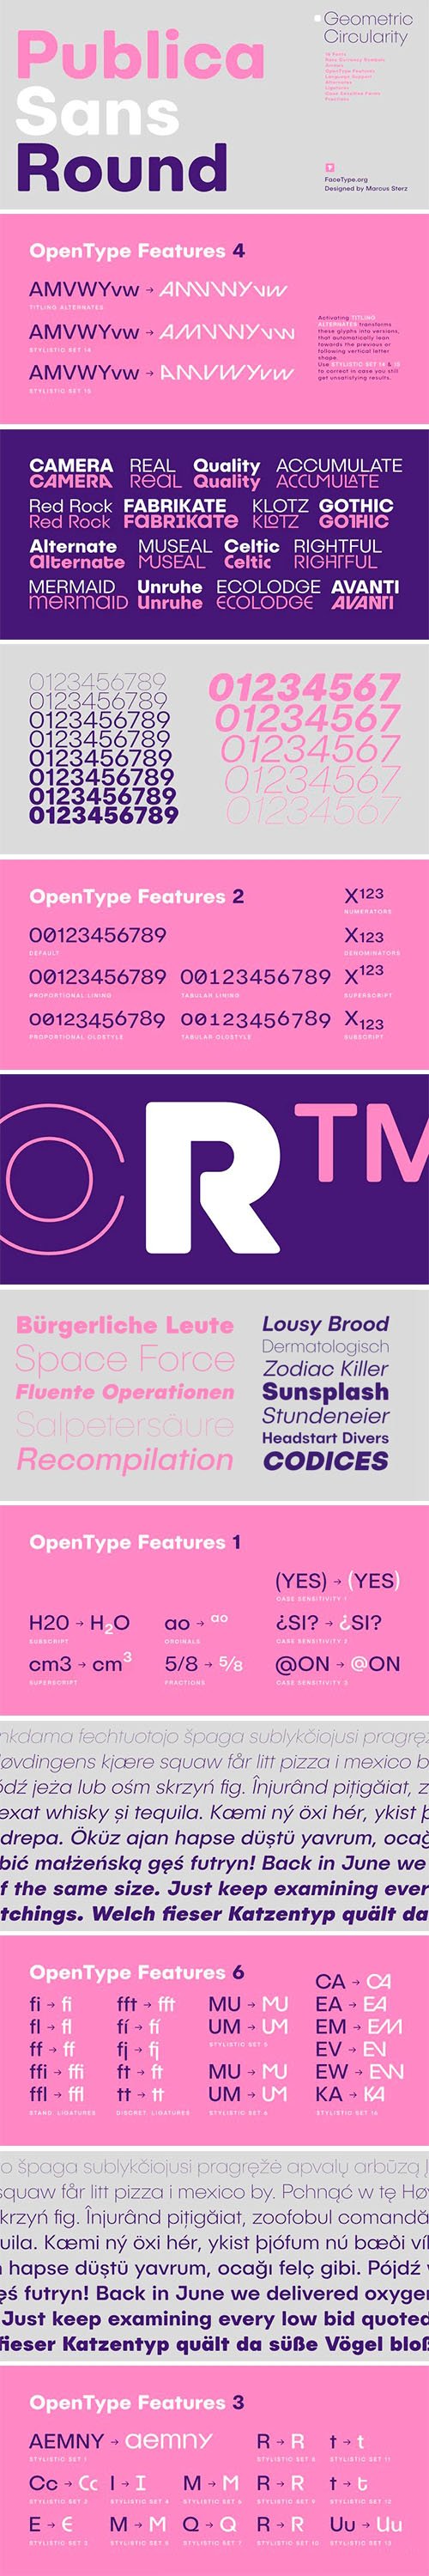 Publica Sans Round Font Family [16-Weights]